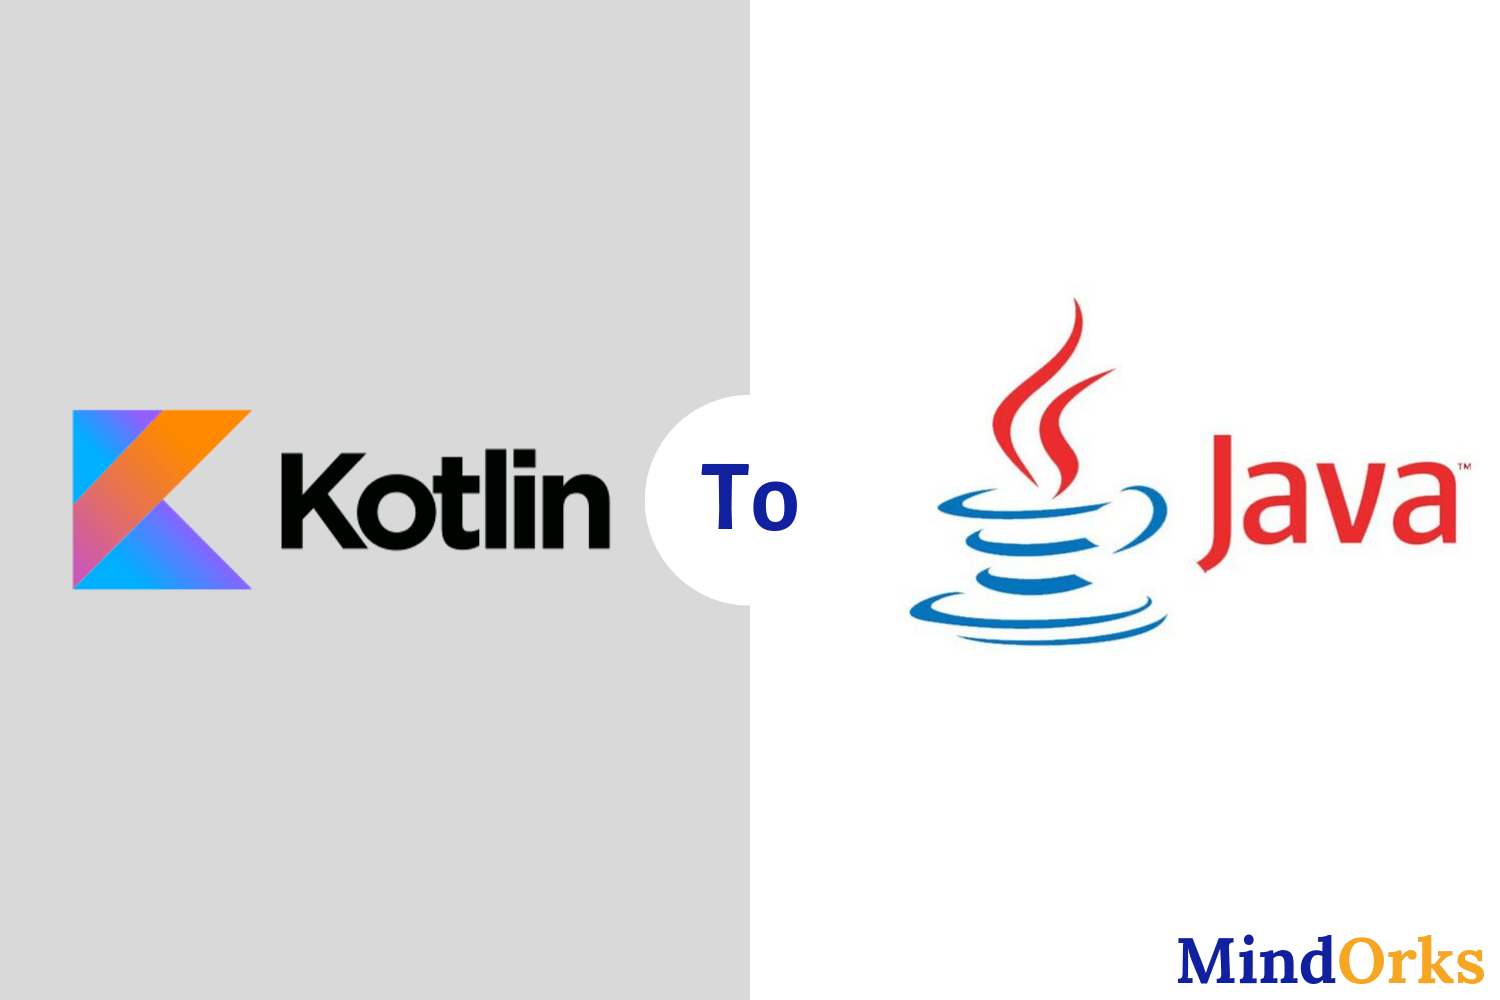 How to convert a Kotlin source file to a Java source file?